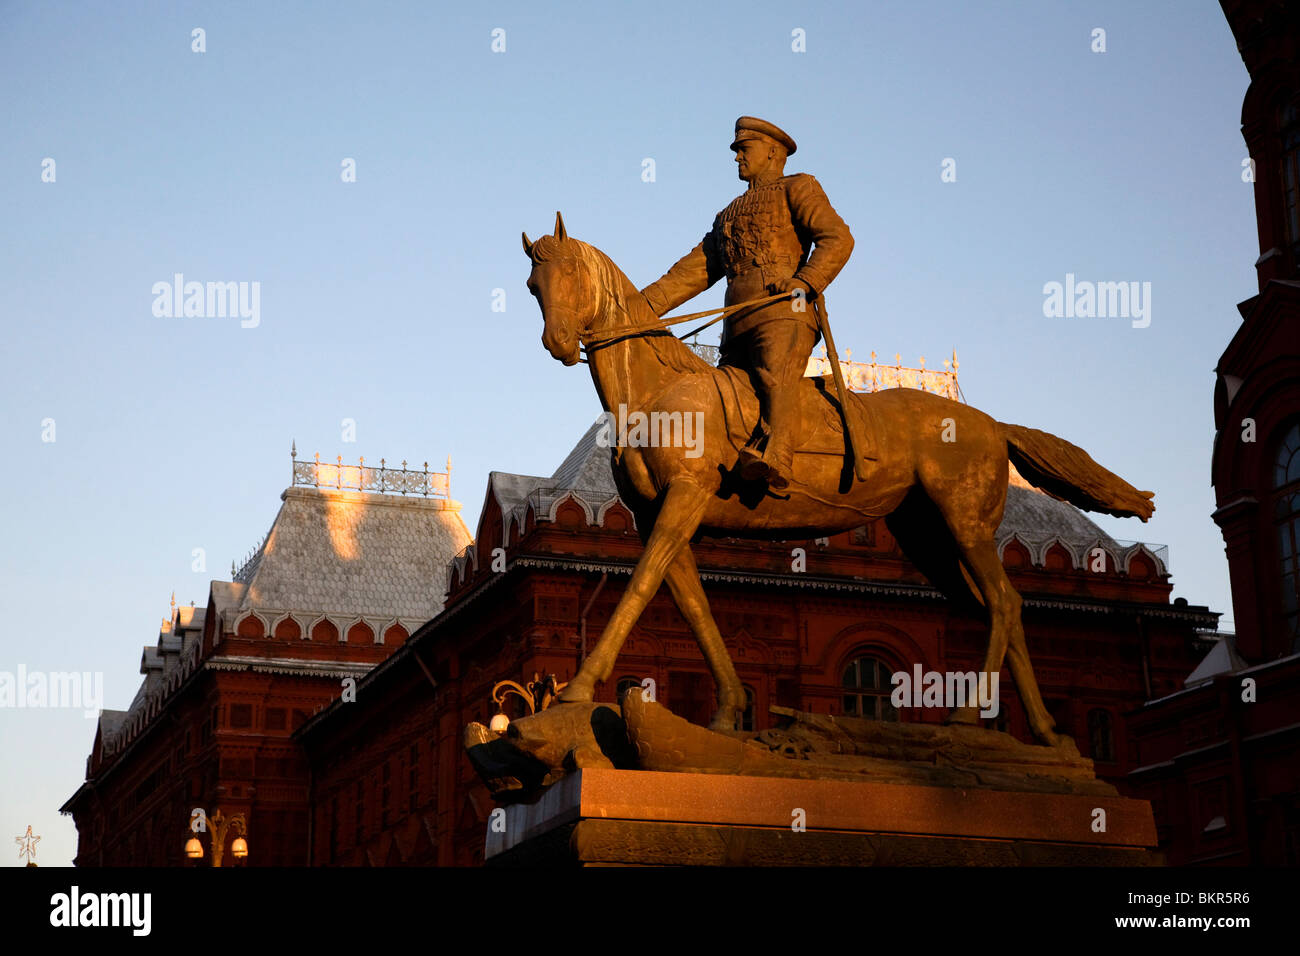 Russia, Moscow; Marshal Zhukov with his horse stepping on Nazi emblems, to commemorate the Soviet victory over Nazism in WW2. Stock Photo